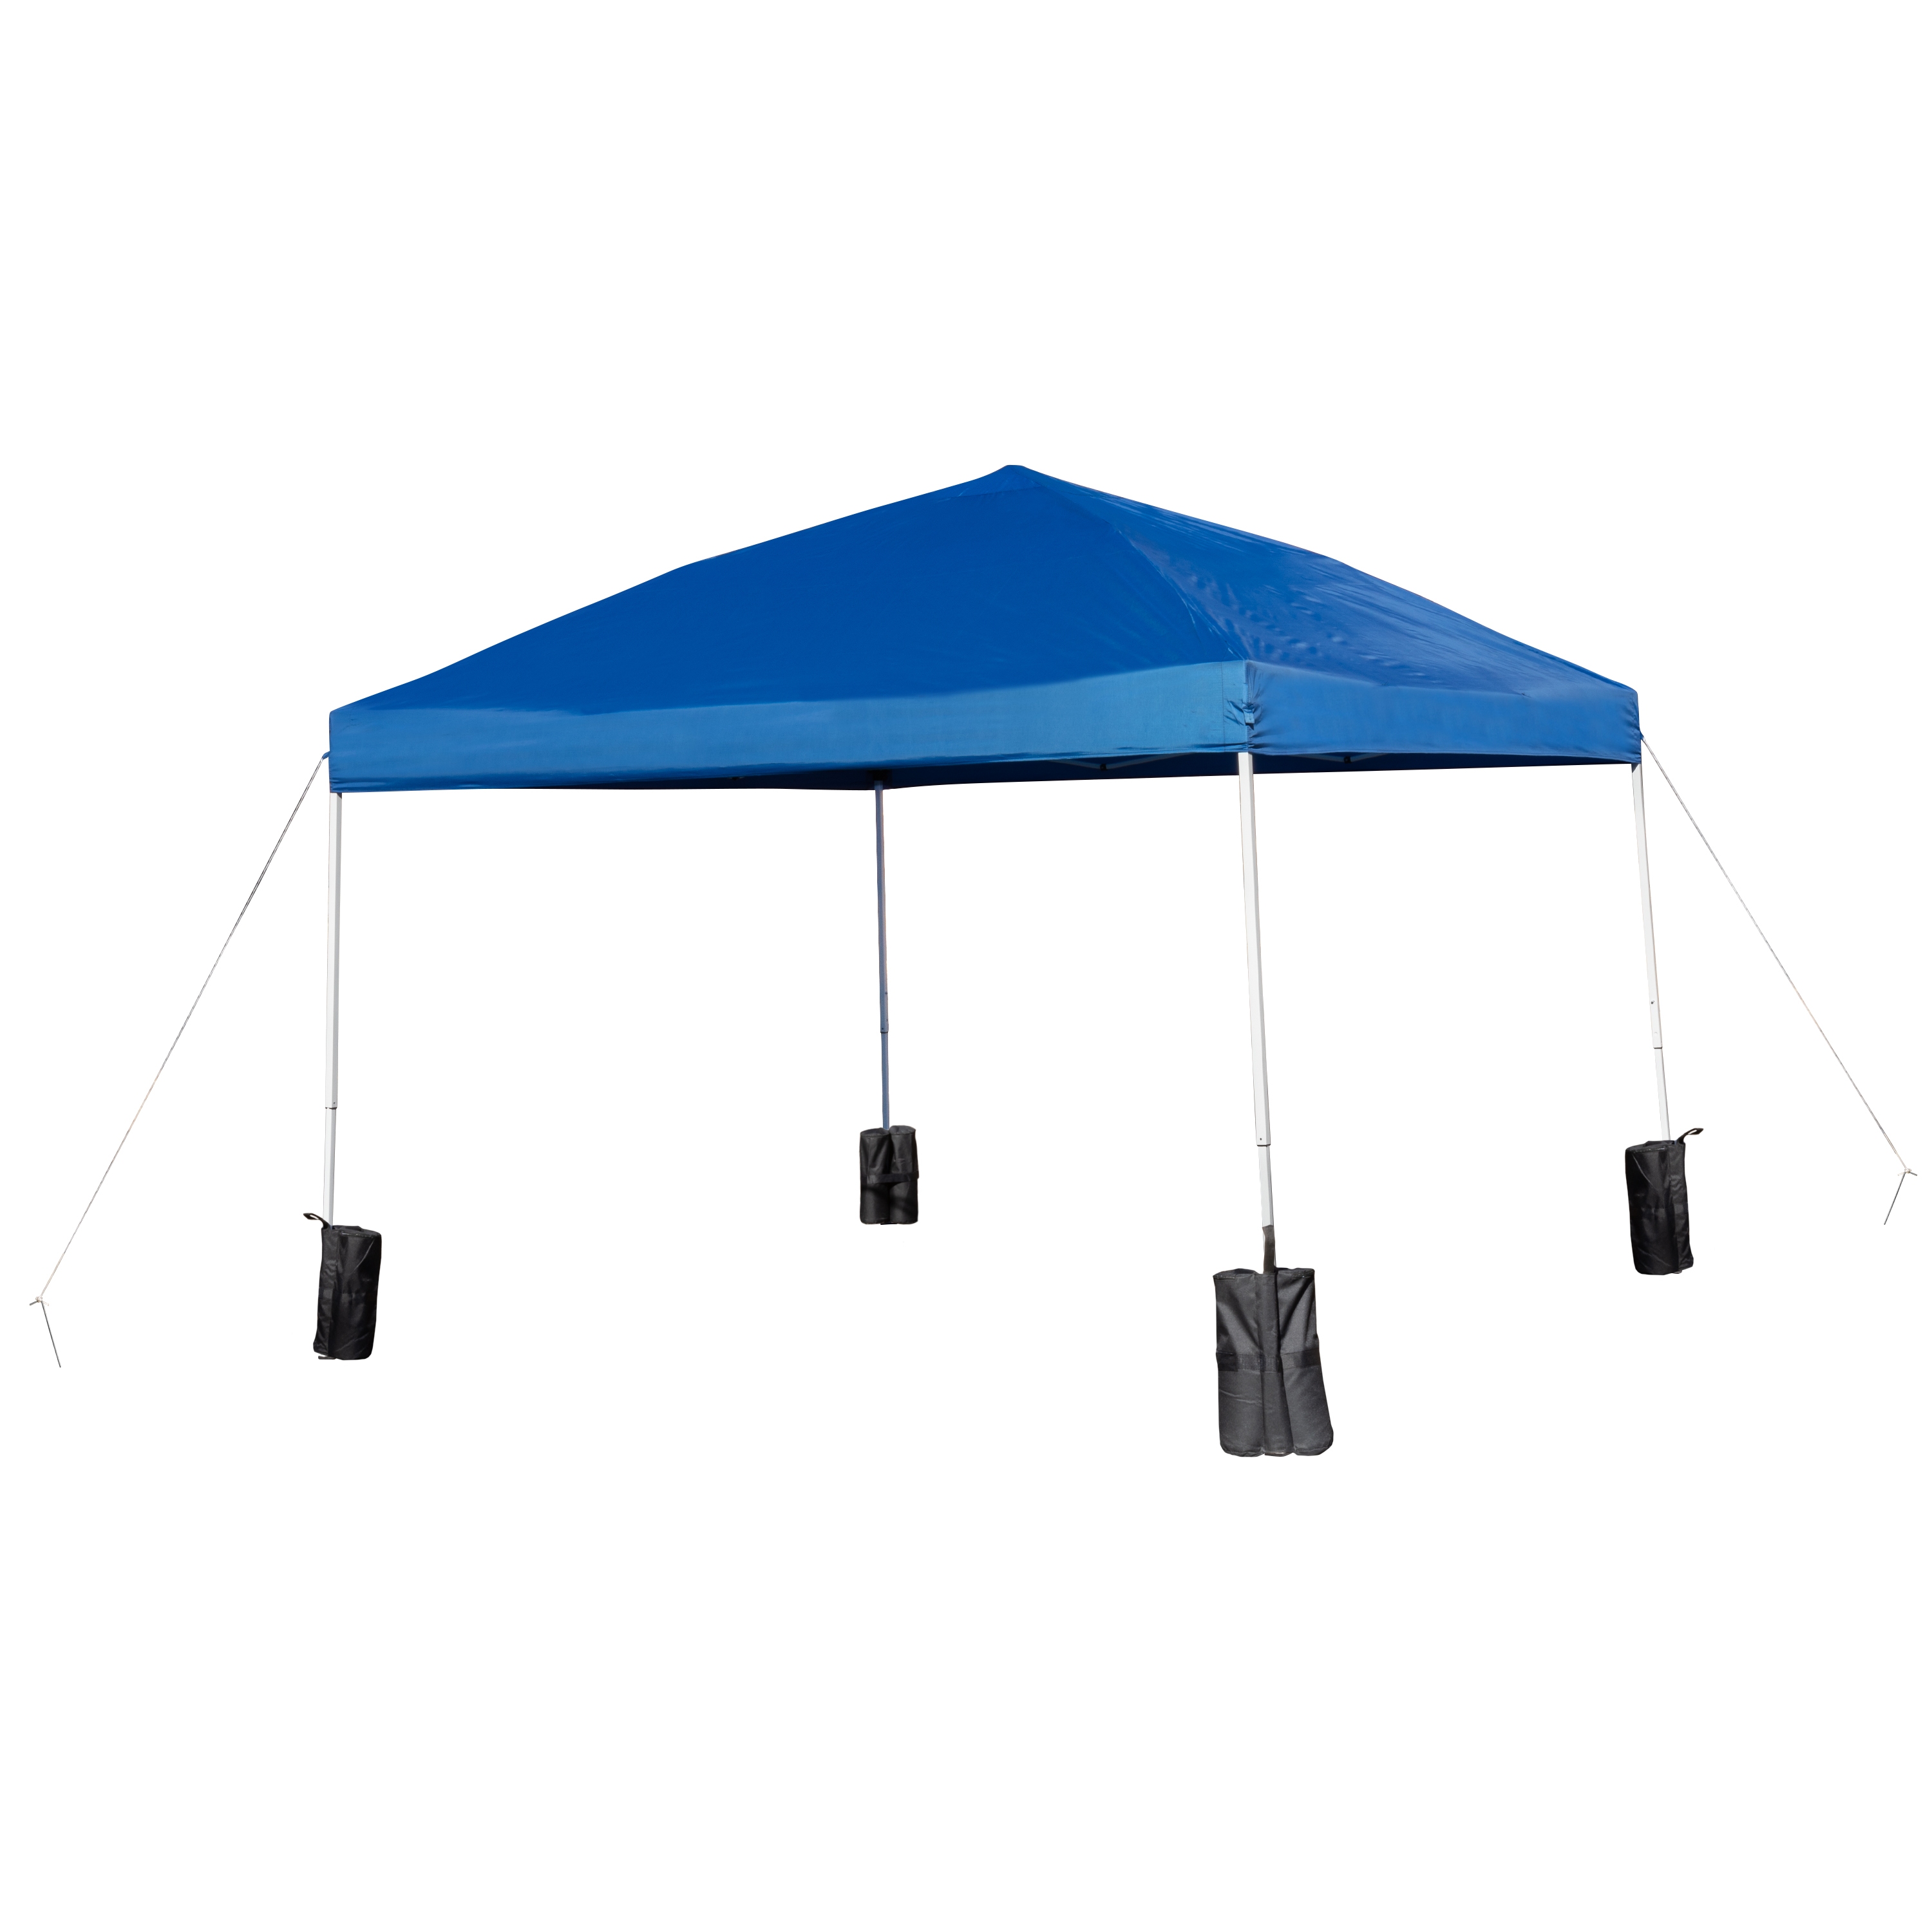 Flash Furniture JJ-GZ1010PKG-BL-GG 10' x 10' Blue Pop Up Straight Leg Canopy Tent with Sandbags and Case